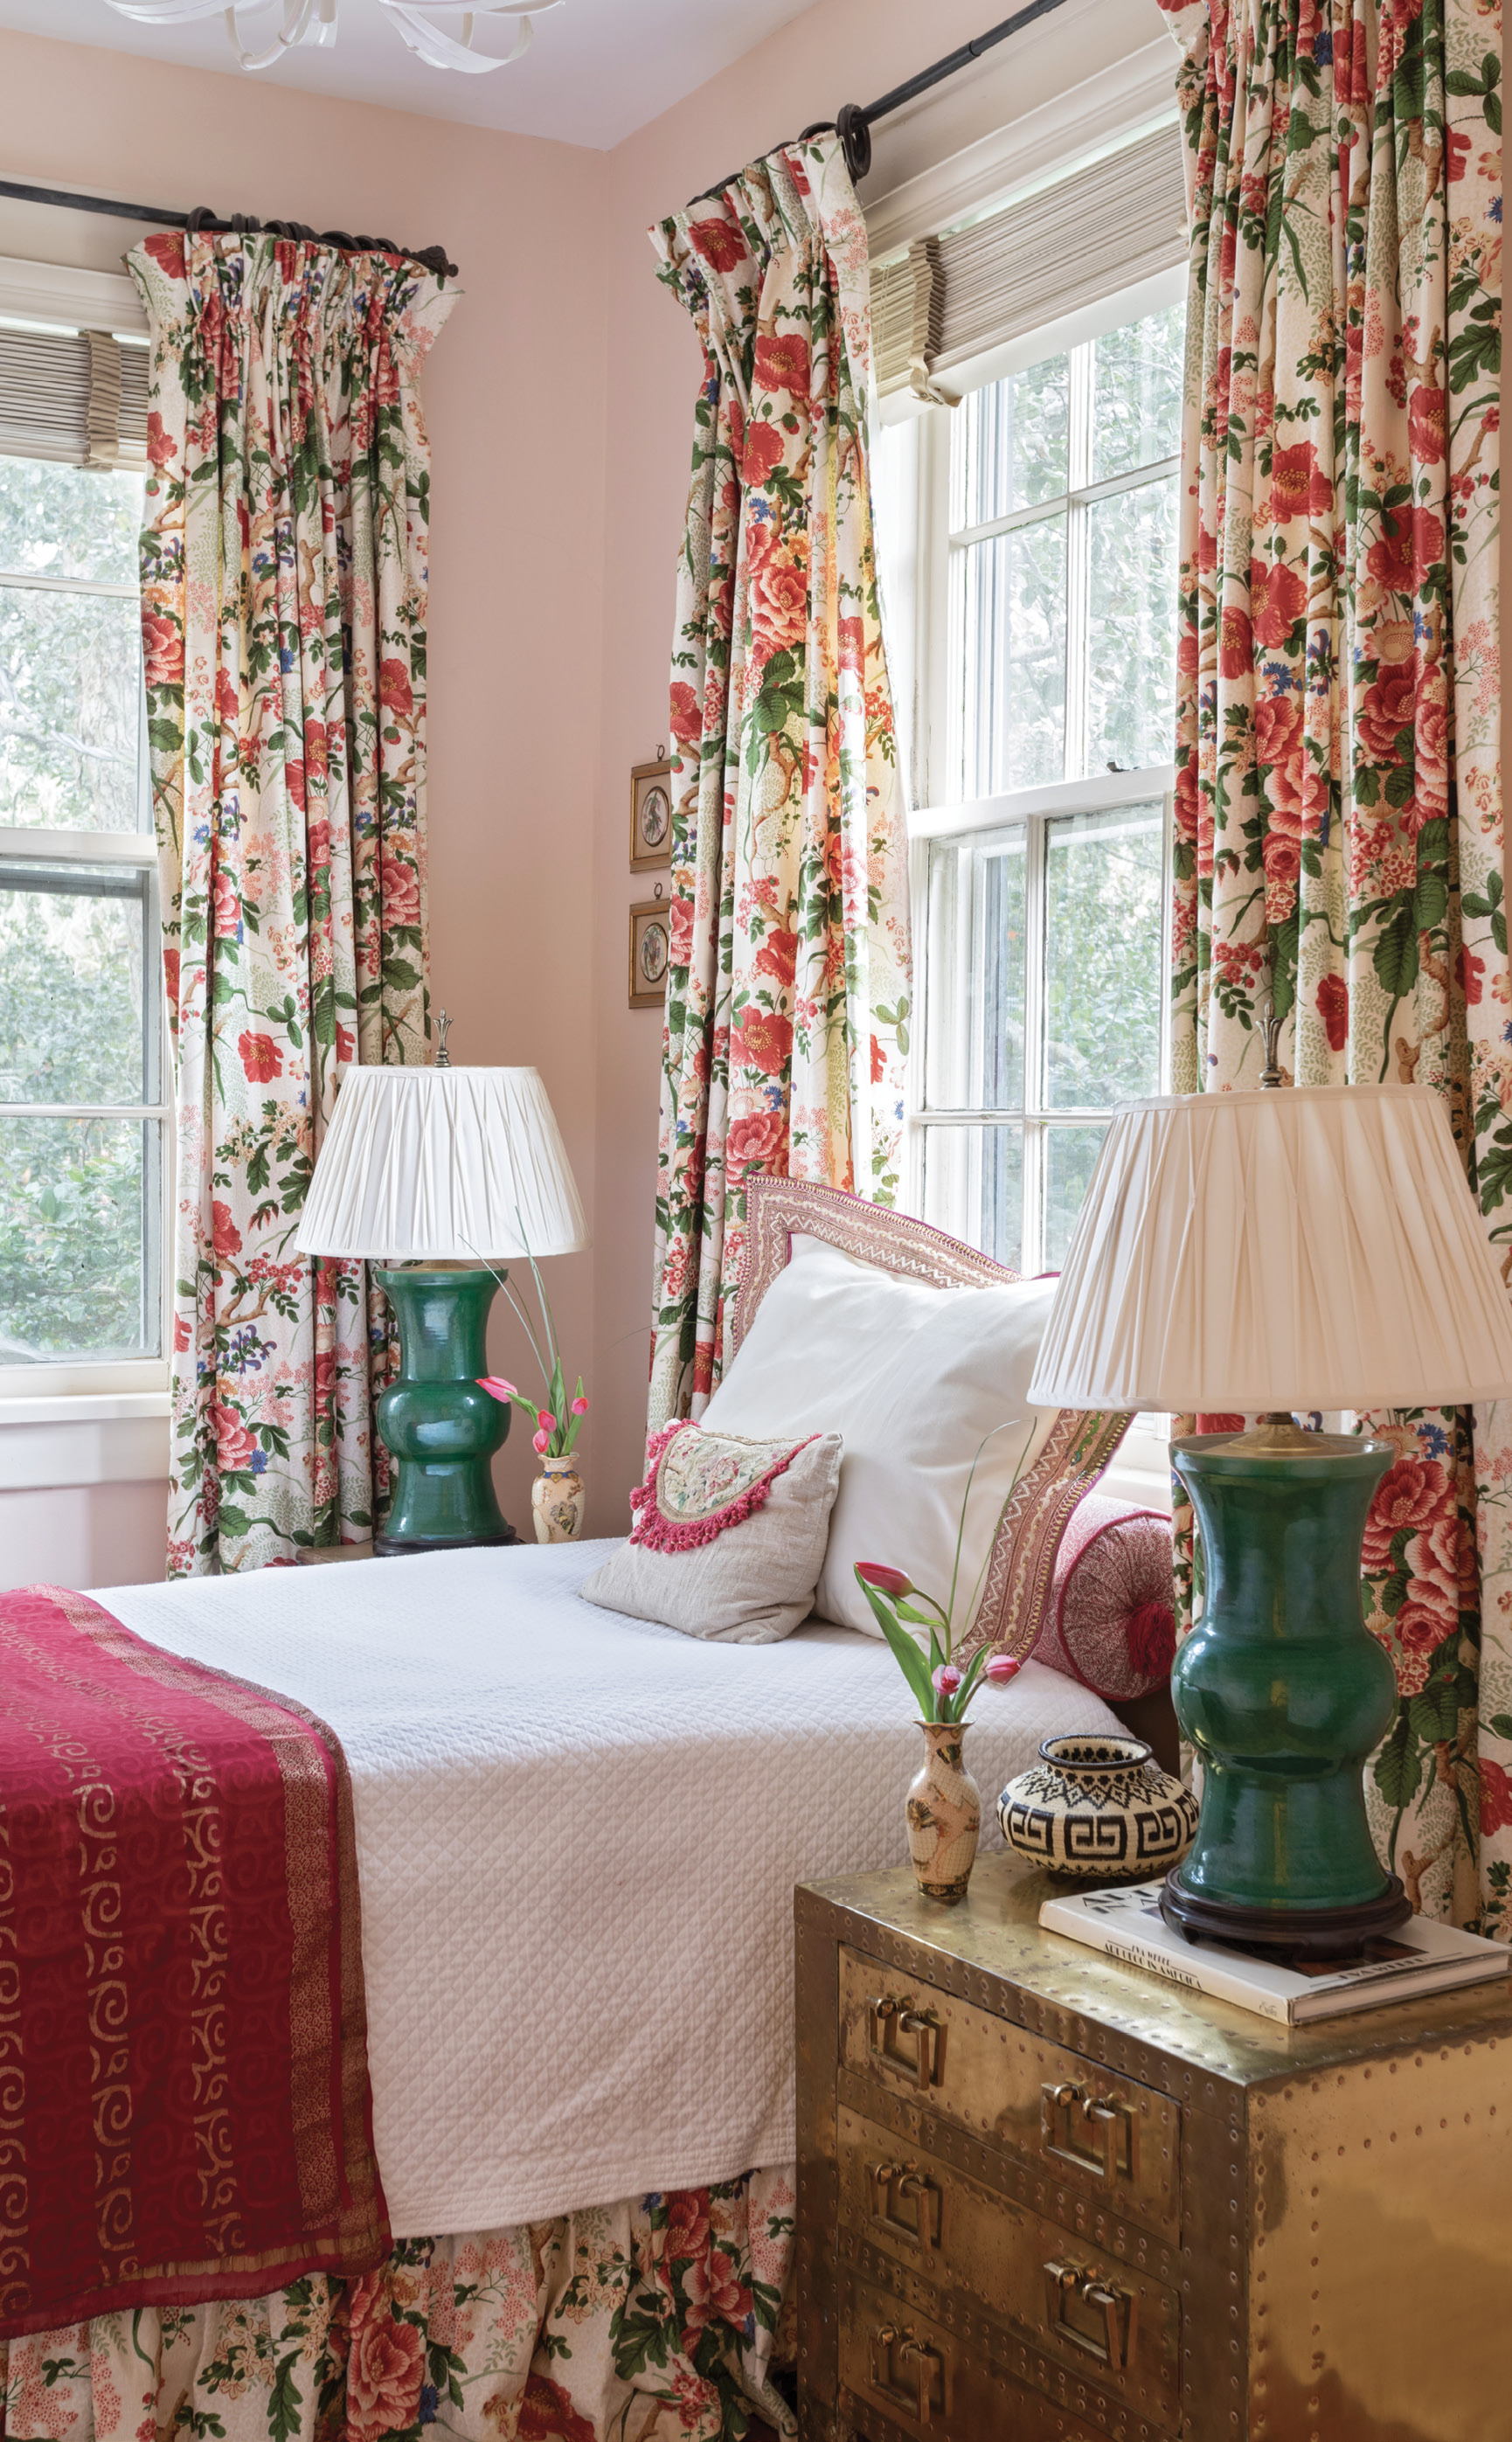 Pretty in Pink: This guest room came with the pretty chintz curtain and bed skirt, which the homeowner loved. Ralph made the space work around the colors in the fabric, adding vintage lamps and a Soane Britain pink bolster and painting the walls in “Queen Anne Pink” by Benjamin Moore.